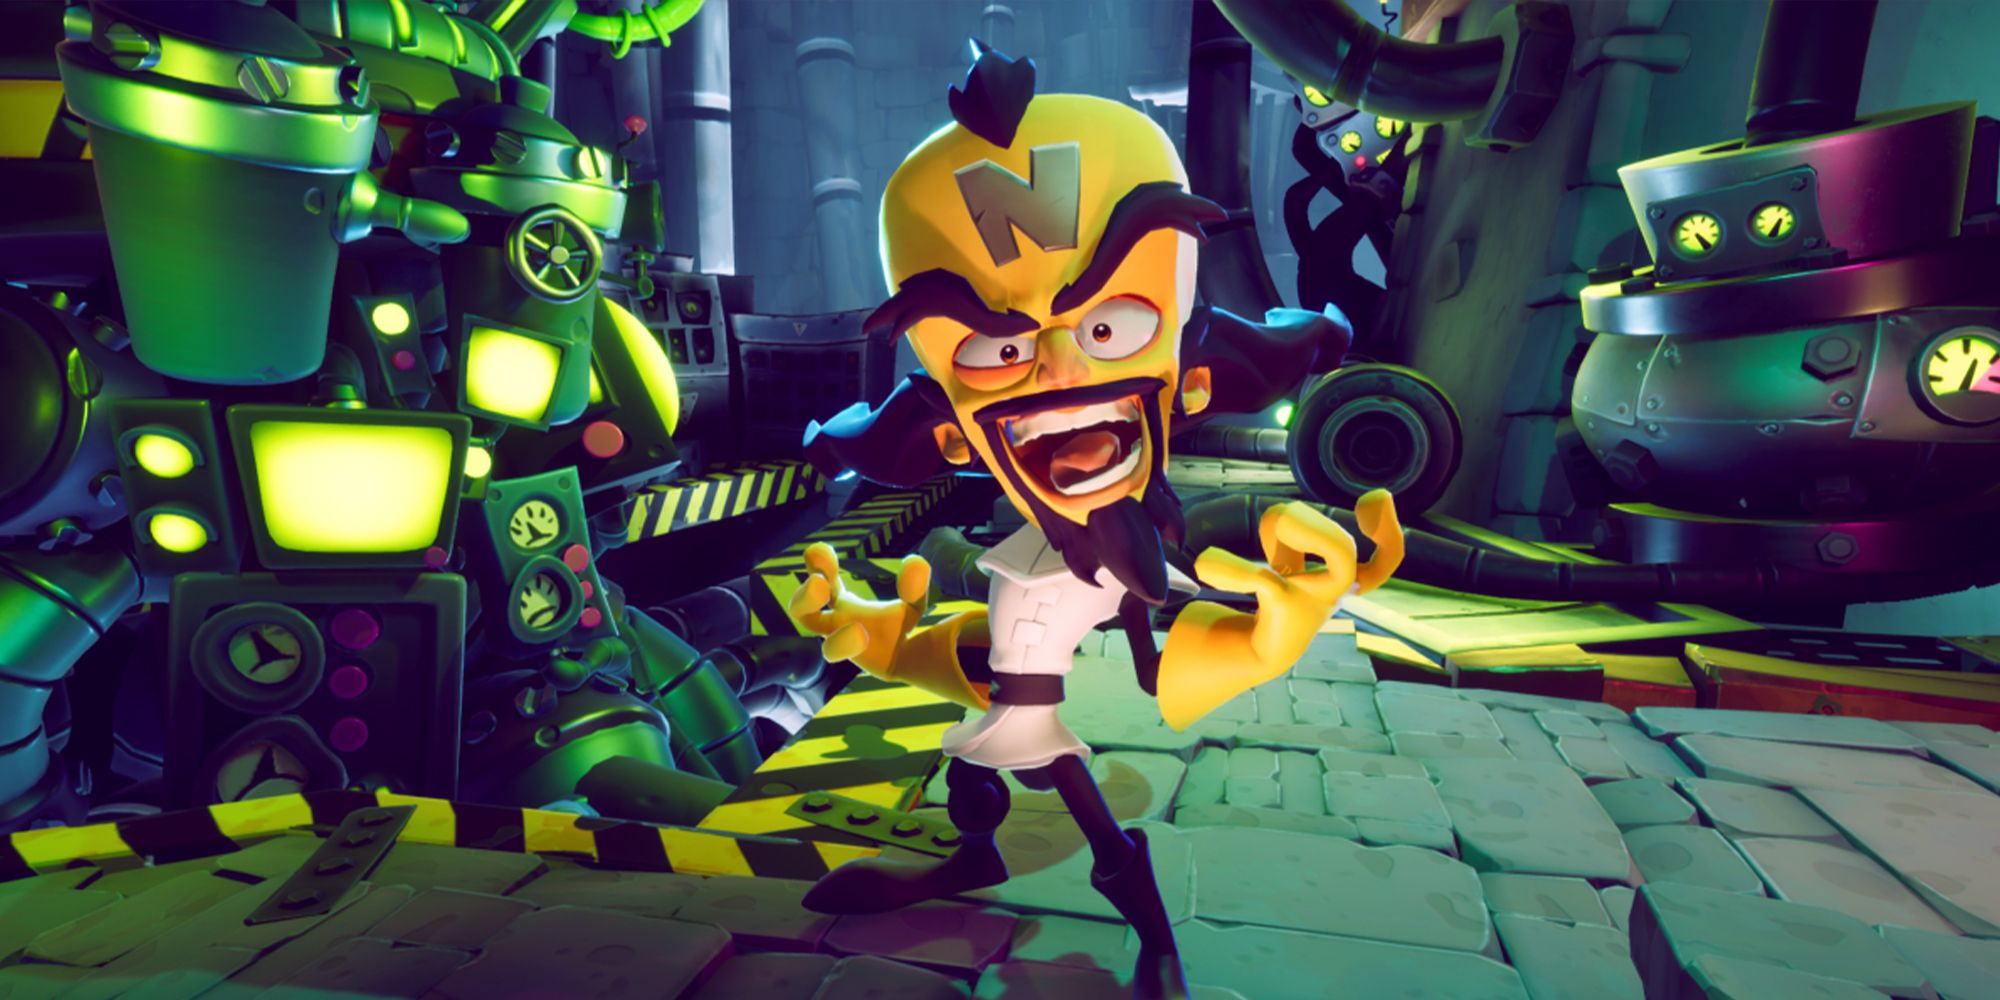 Crash Bandicoot 4's Neo Cortex is pulling a pose in a mad laboratory.